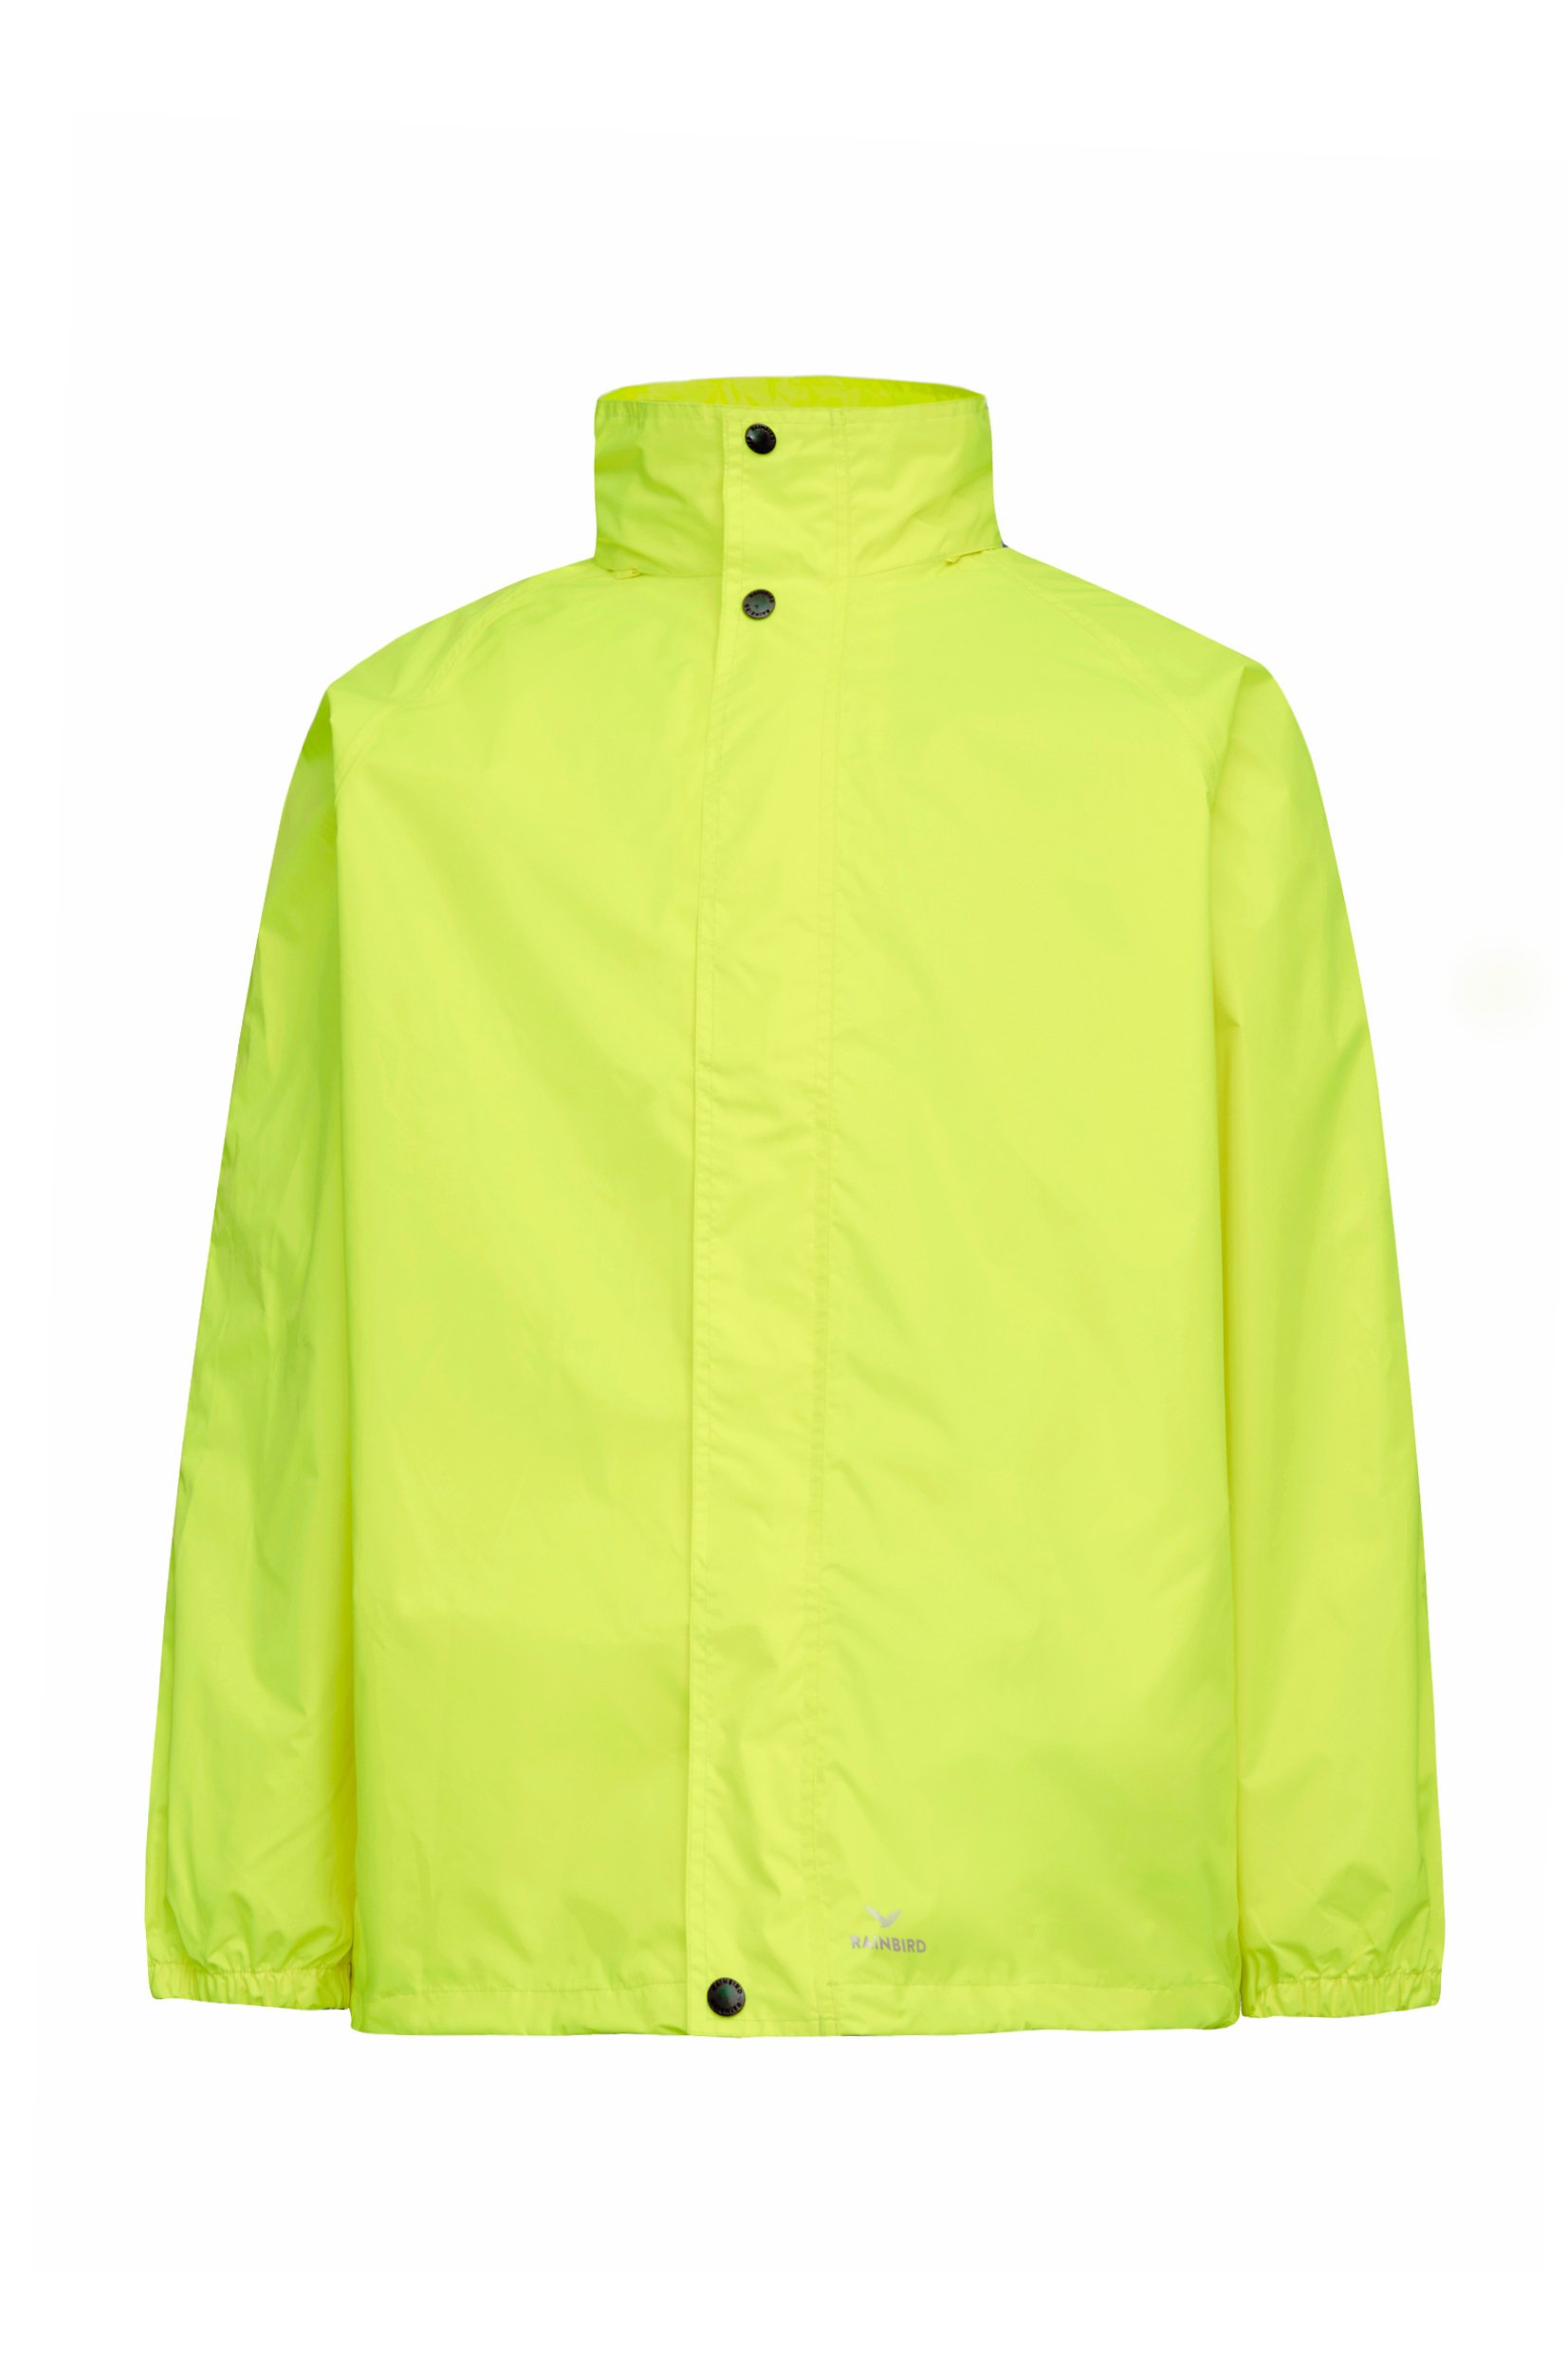 RAINBIRD Stowaway Jackets - Stay Dry on Your next Adventure with our ...